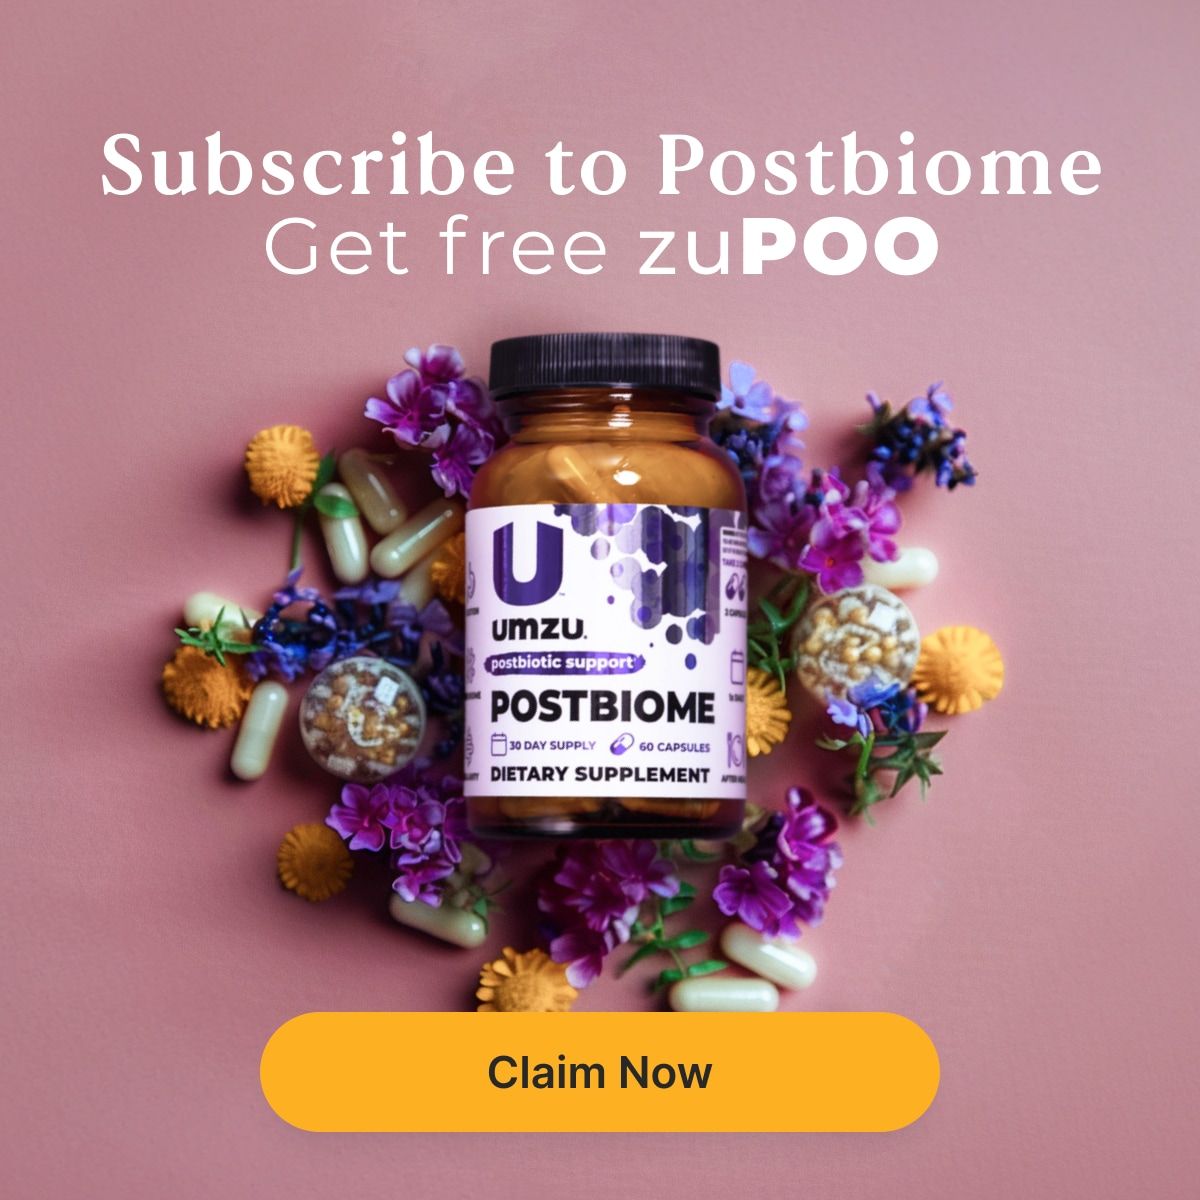 Subscribe to Postbiome, Get free zuPOO